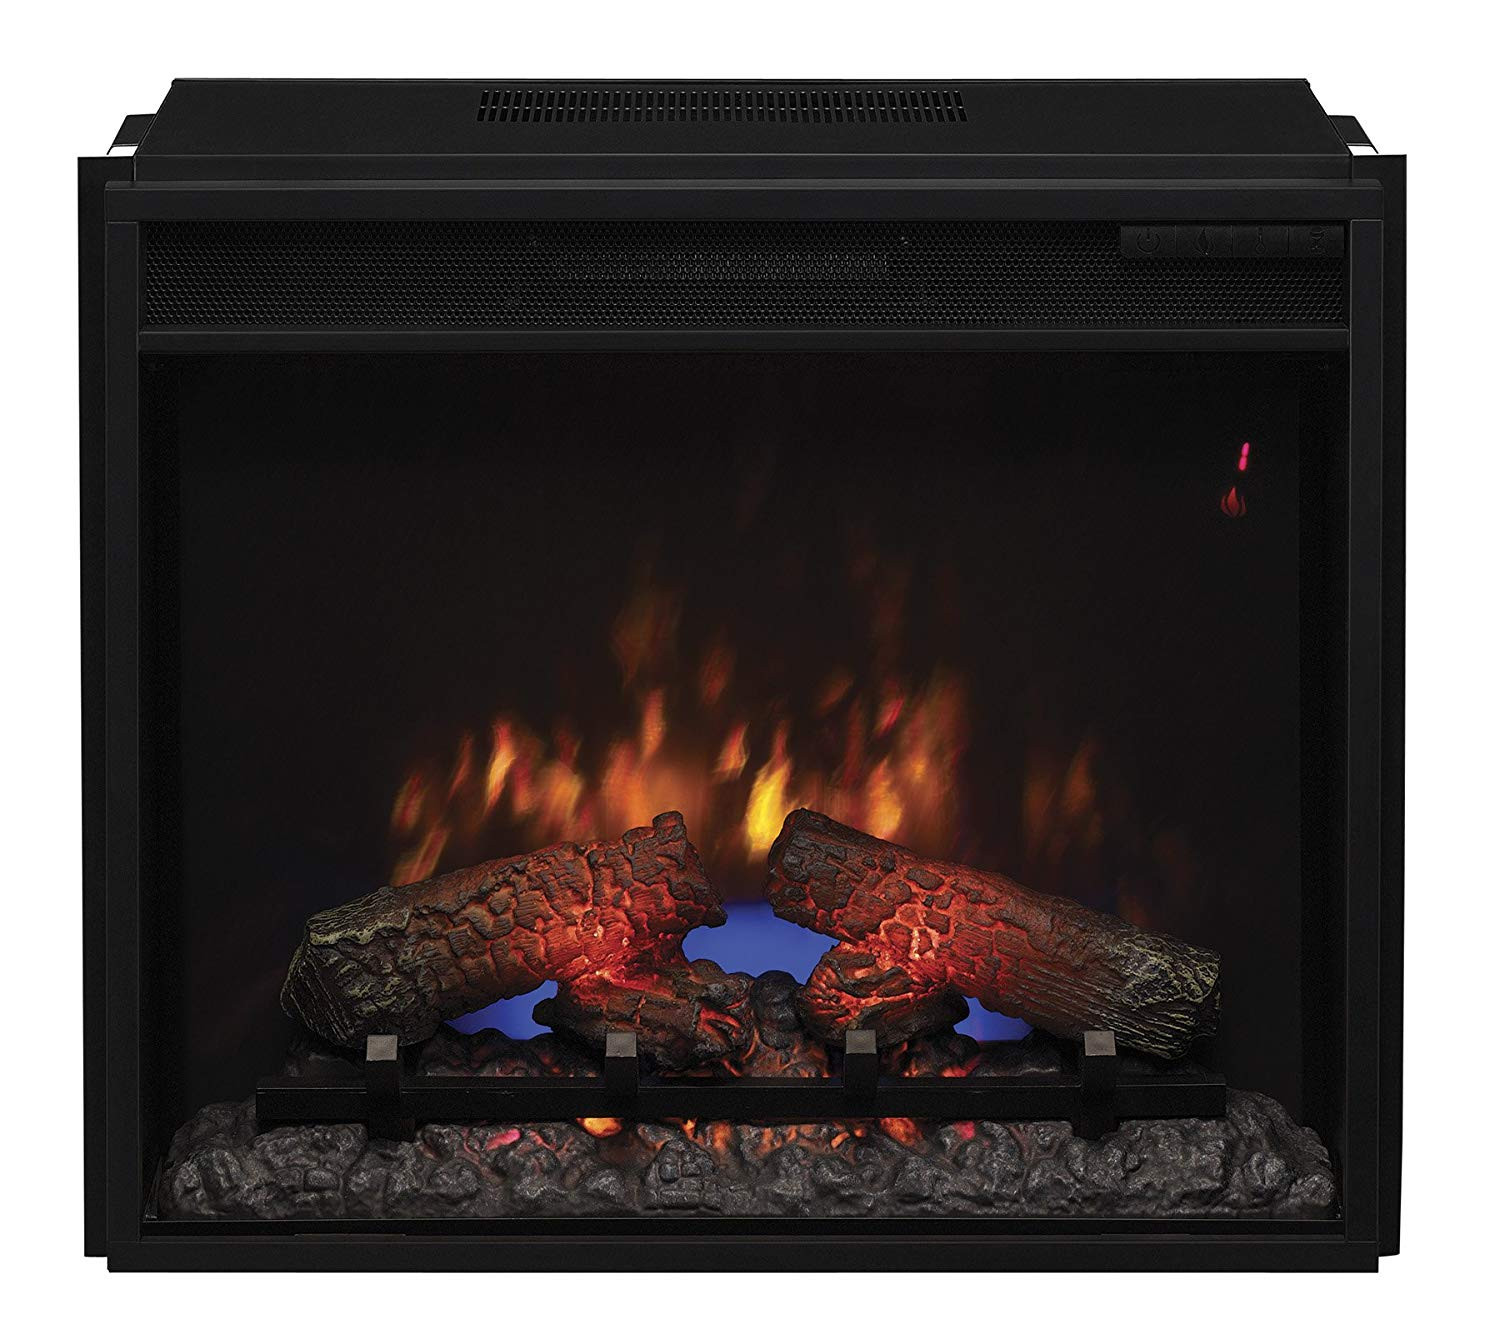 Duraflame Electric Fireplace Insert
 27 Luxury Duraflame Electric Fireplace Insert